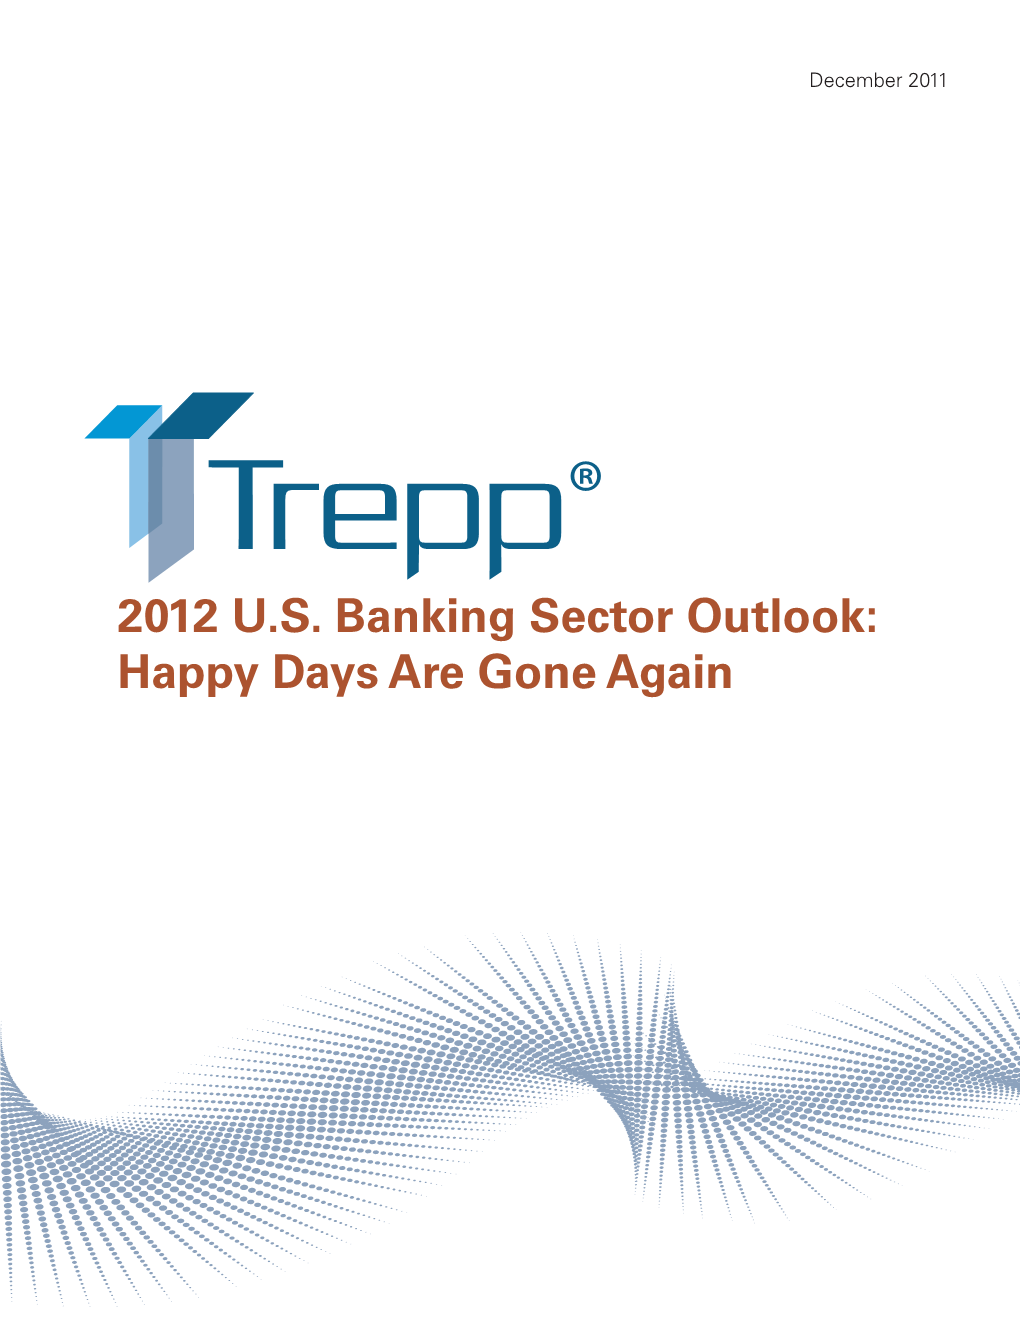 2012 U.S. Banking Sector Outlook: Happy Days Are Gone Again 2012 U.S